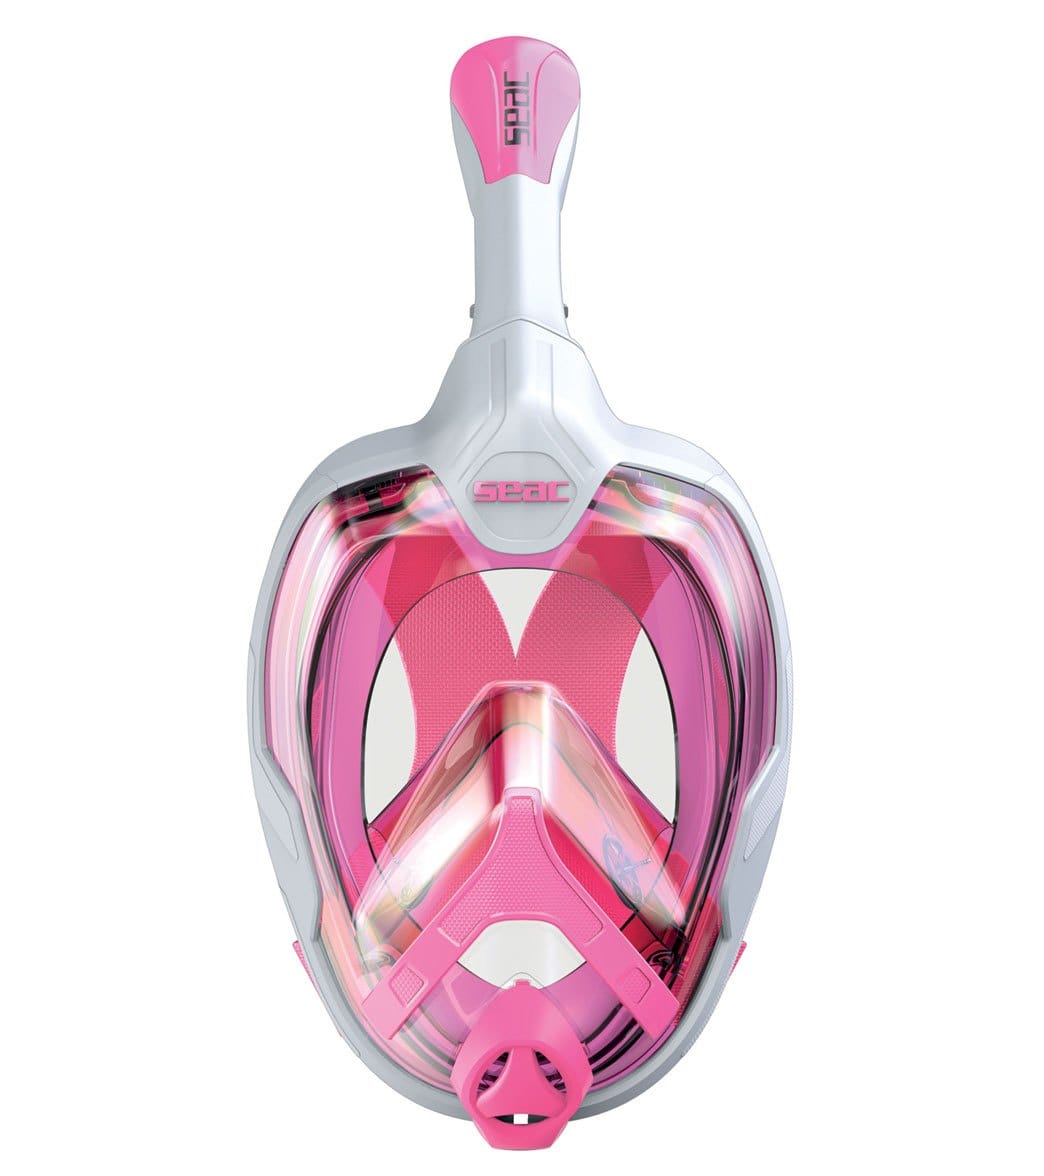 Seac Usa Magica Full Face Snorkeling Mask - White/Pink Small/Medium - Swimoutlet.com